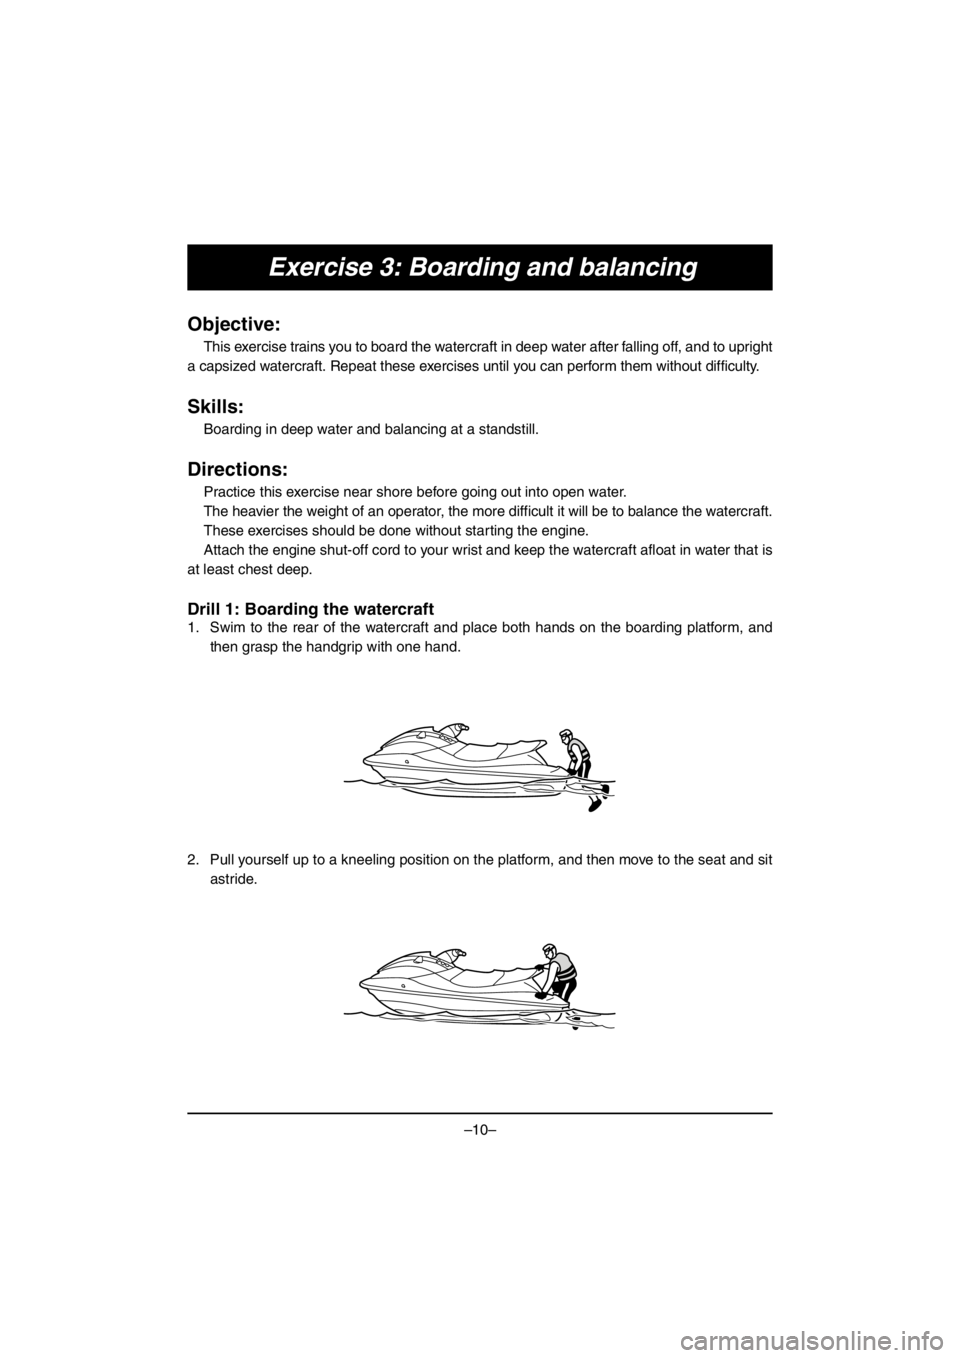 YAMAHA EX 2017  Manual de utilização (in Portuguese) –10–
Exercise 3: Boarding and balancing
Objective:
This exercise trains you to board the watercraft in deep water after falling off, and to upright
a capsized watercraft. Repeat these exercises un